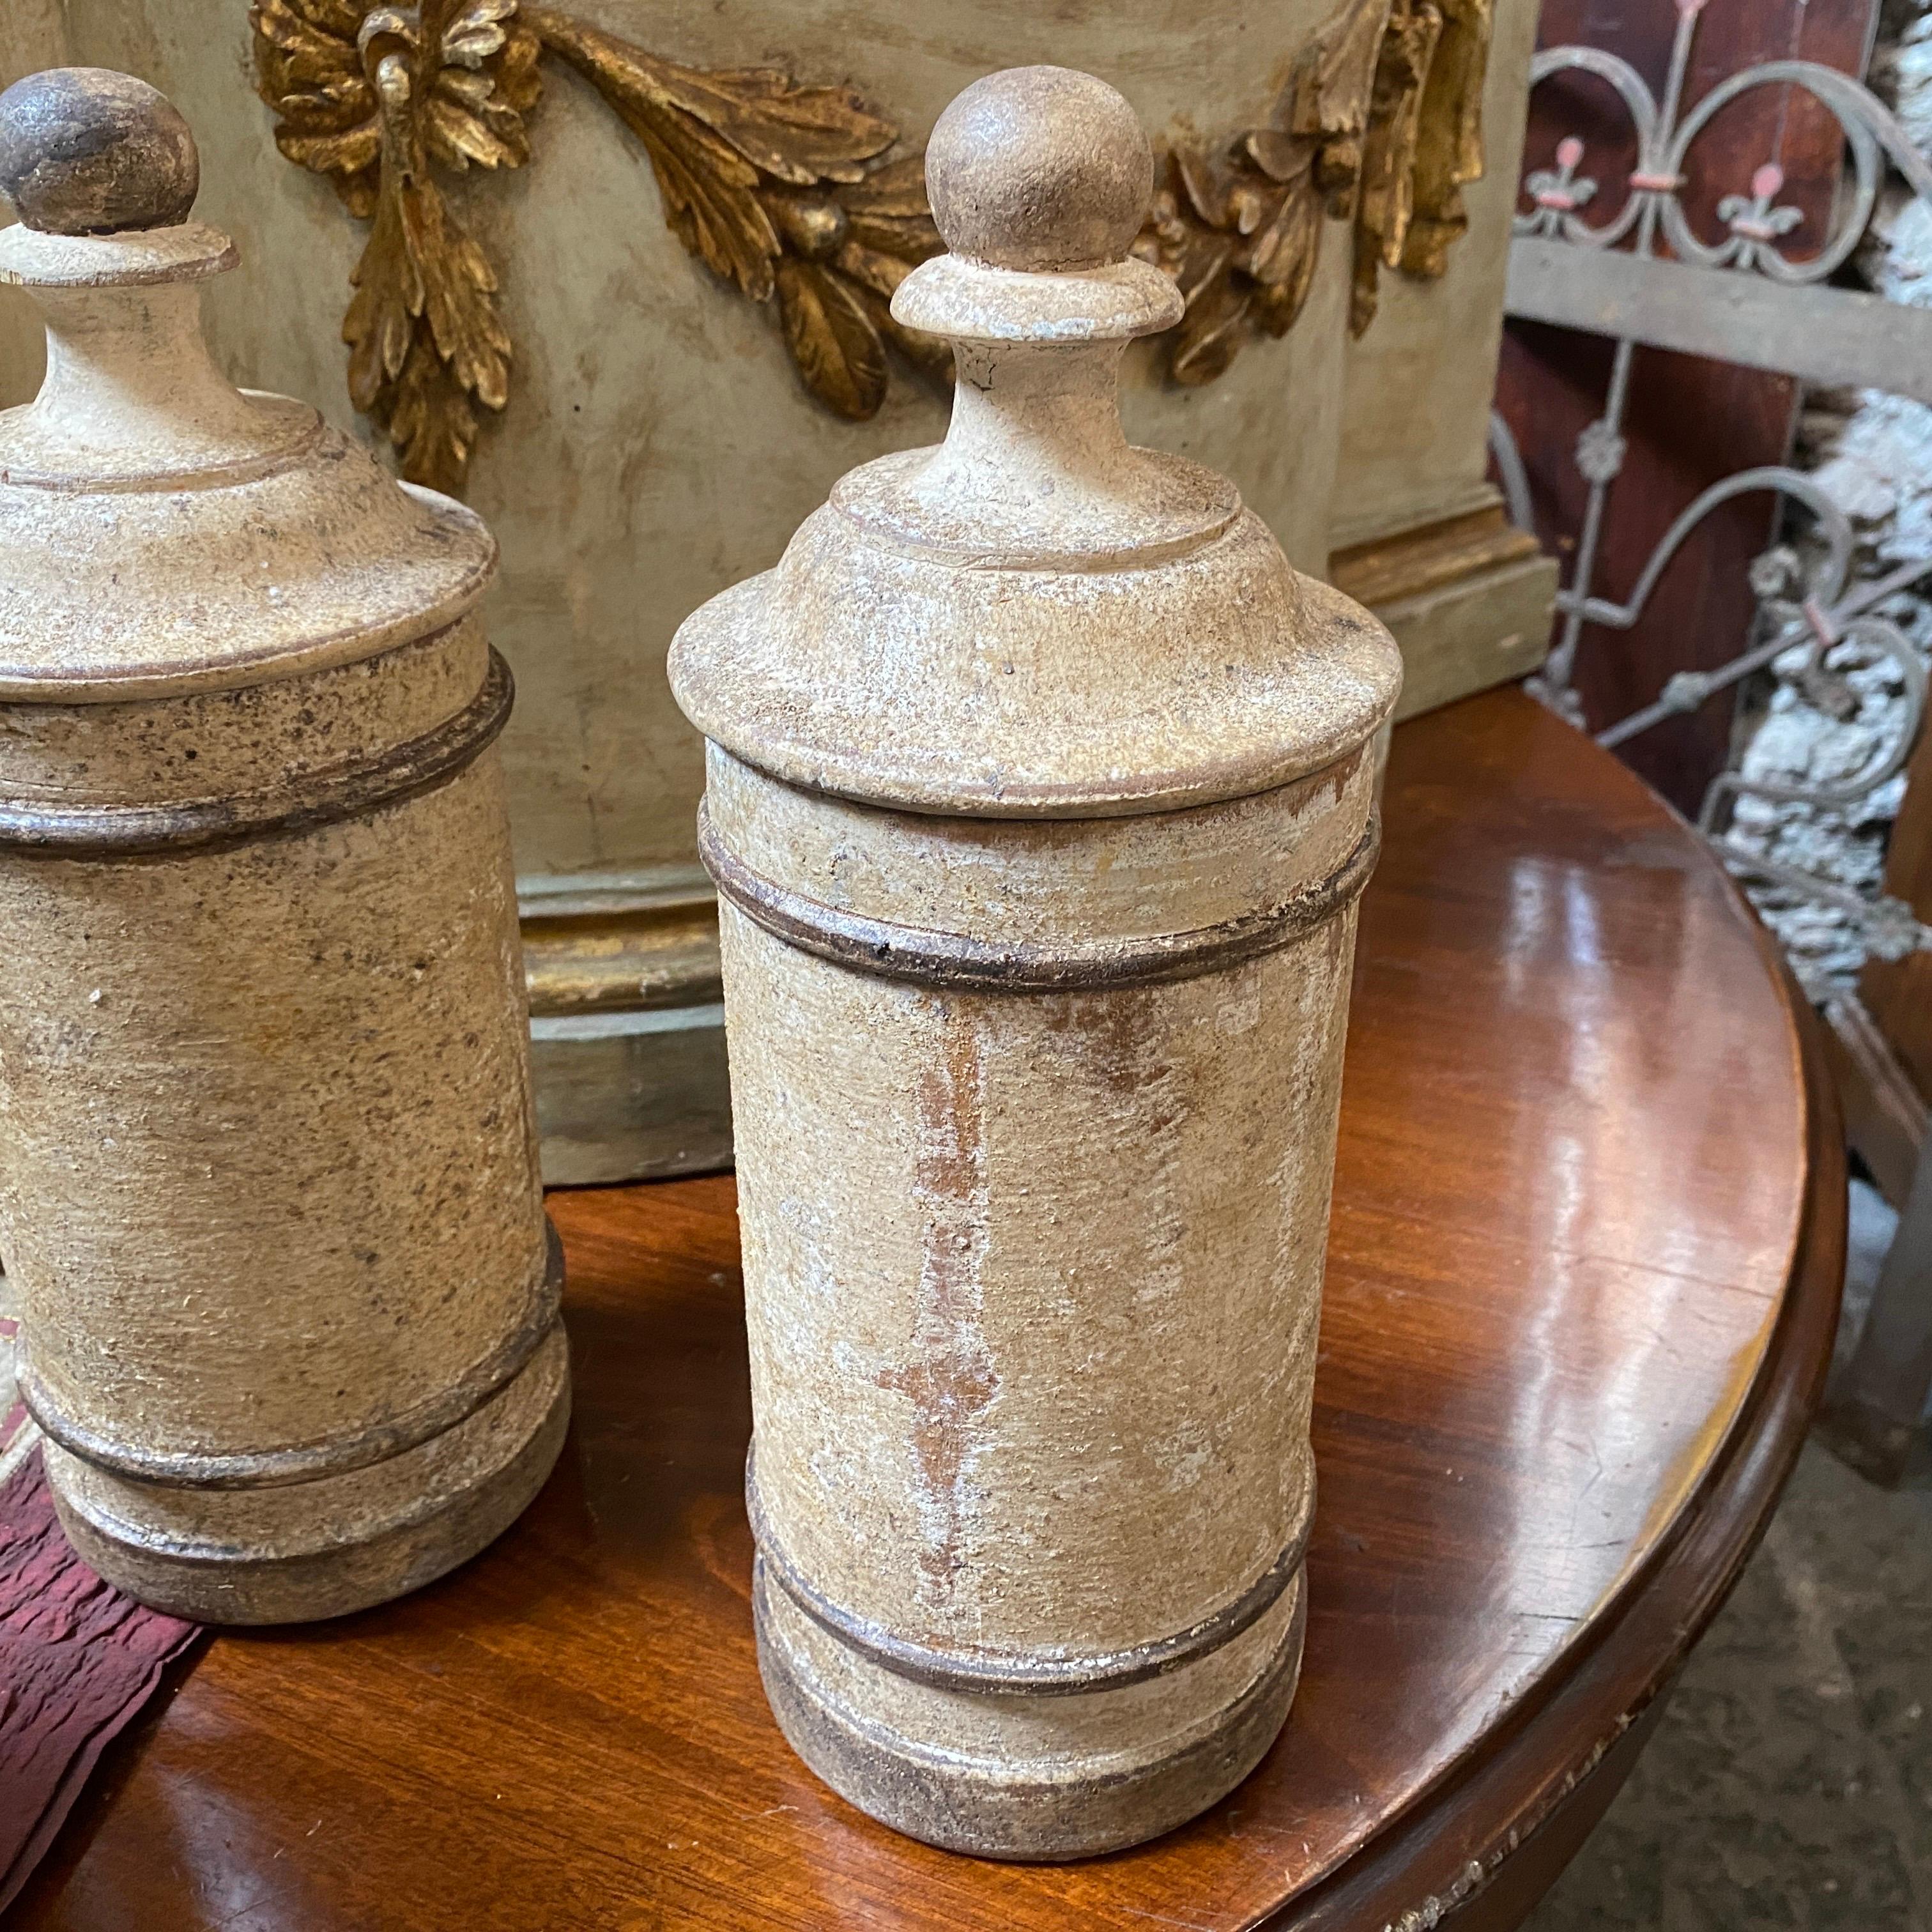 Three apothecary jars hand-crafted and lacquered in Florence in the late 19th century. they are in original conditions with signs of use and age visible on the photos. They are sold individually.